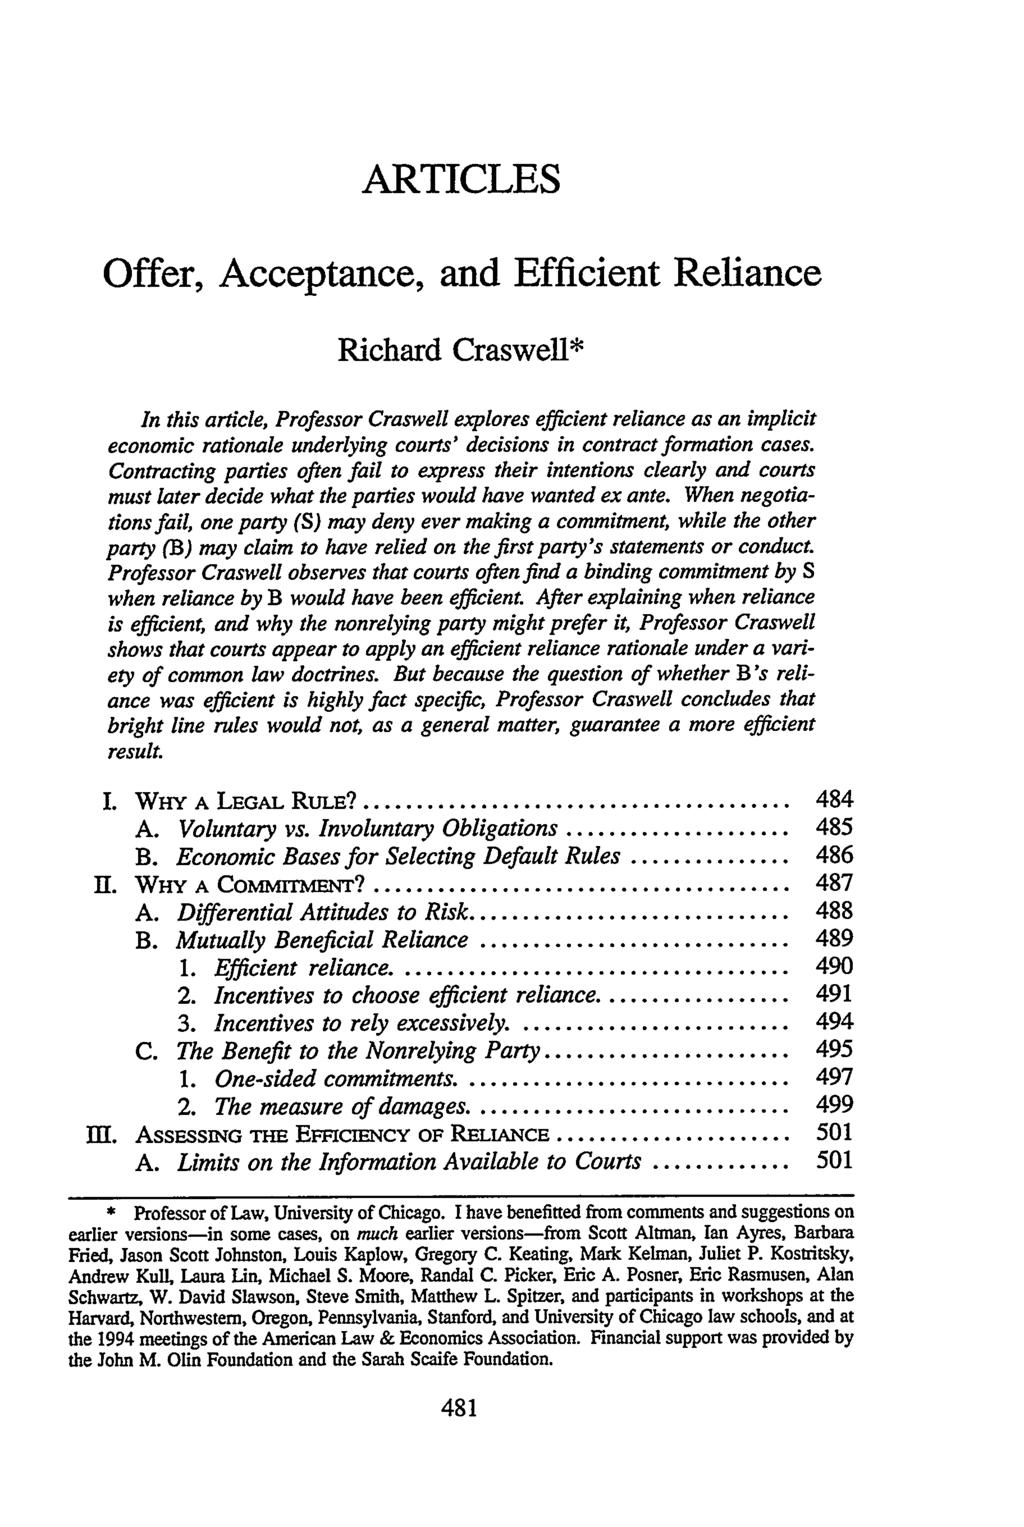 ARTICLES Offer, Acceptance, and Efficient Reliance Richard Craswell* In this article, Professor Craswell explores efficient reliance as an implicit economic rationale underlying courts' decisions in